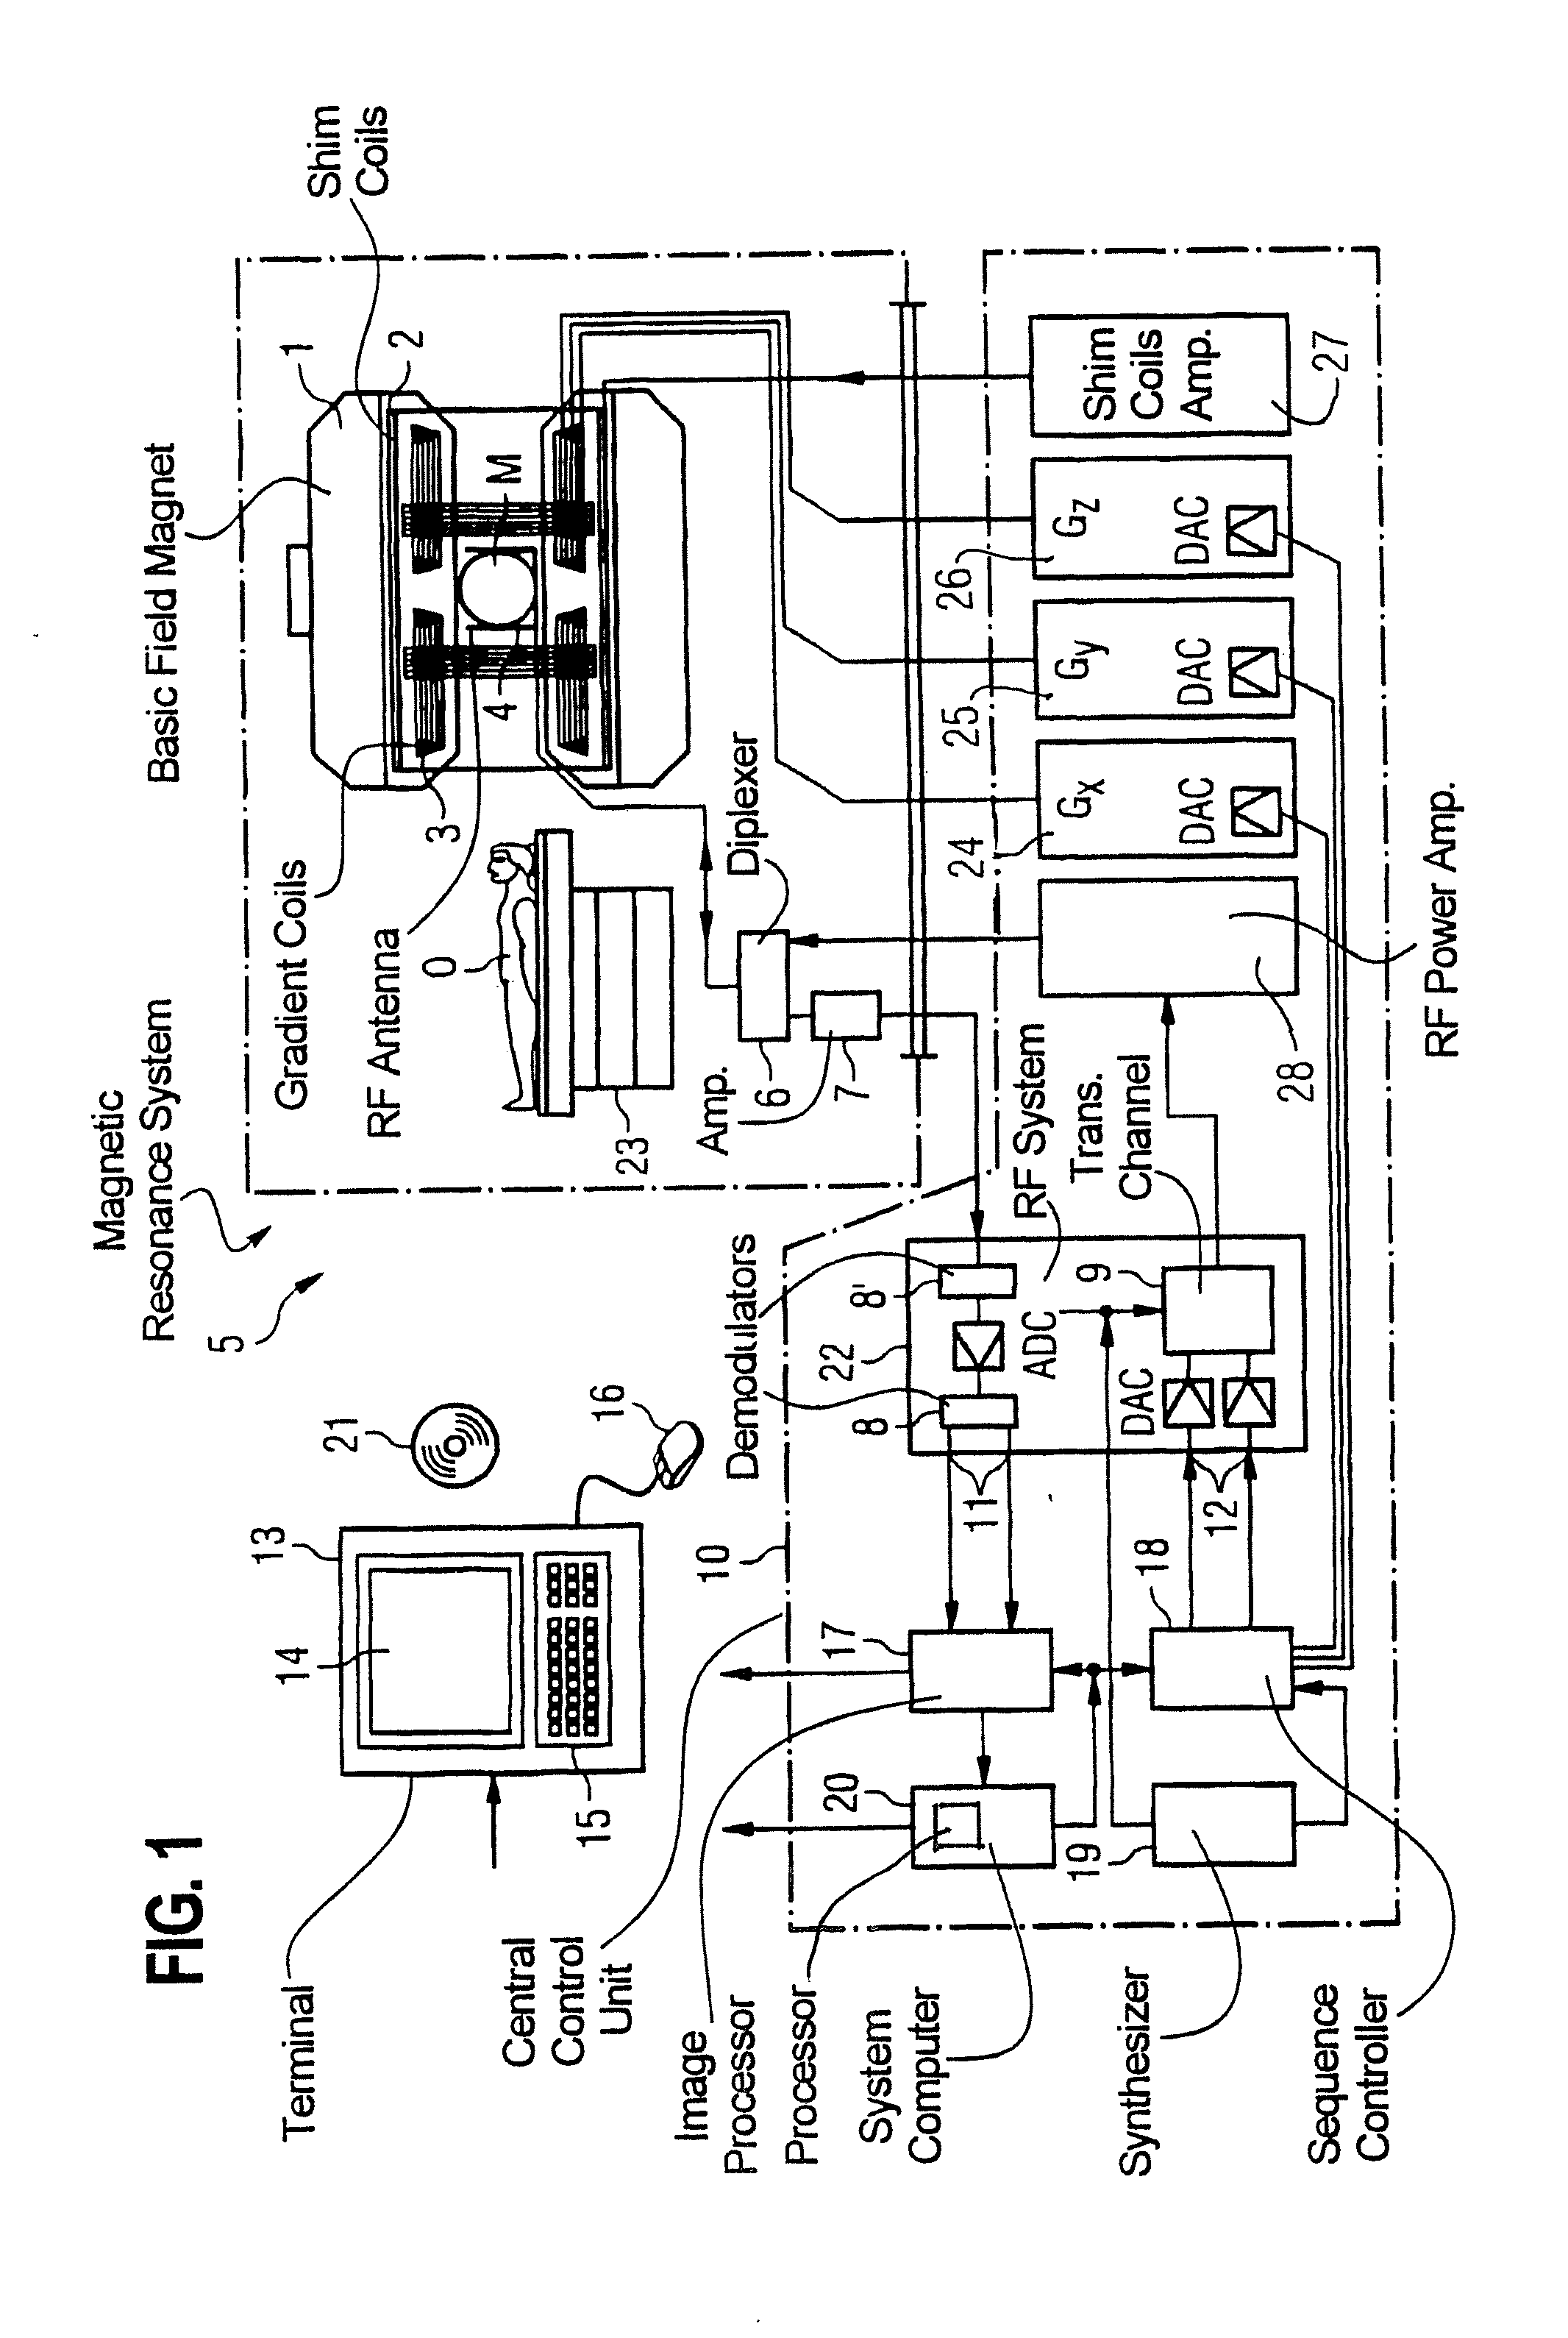 Method and apparatus to acquire magnetic resonance data